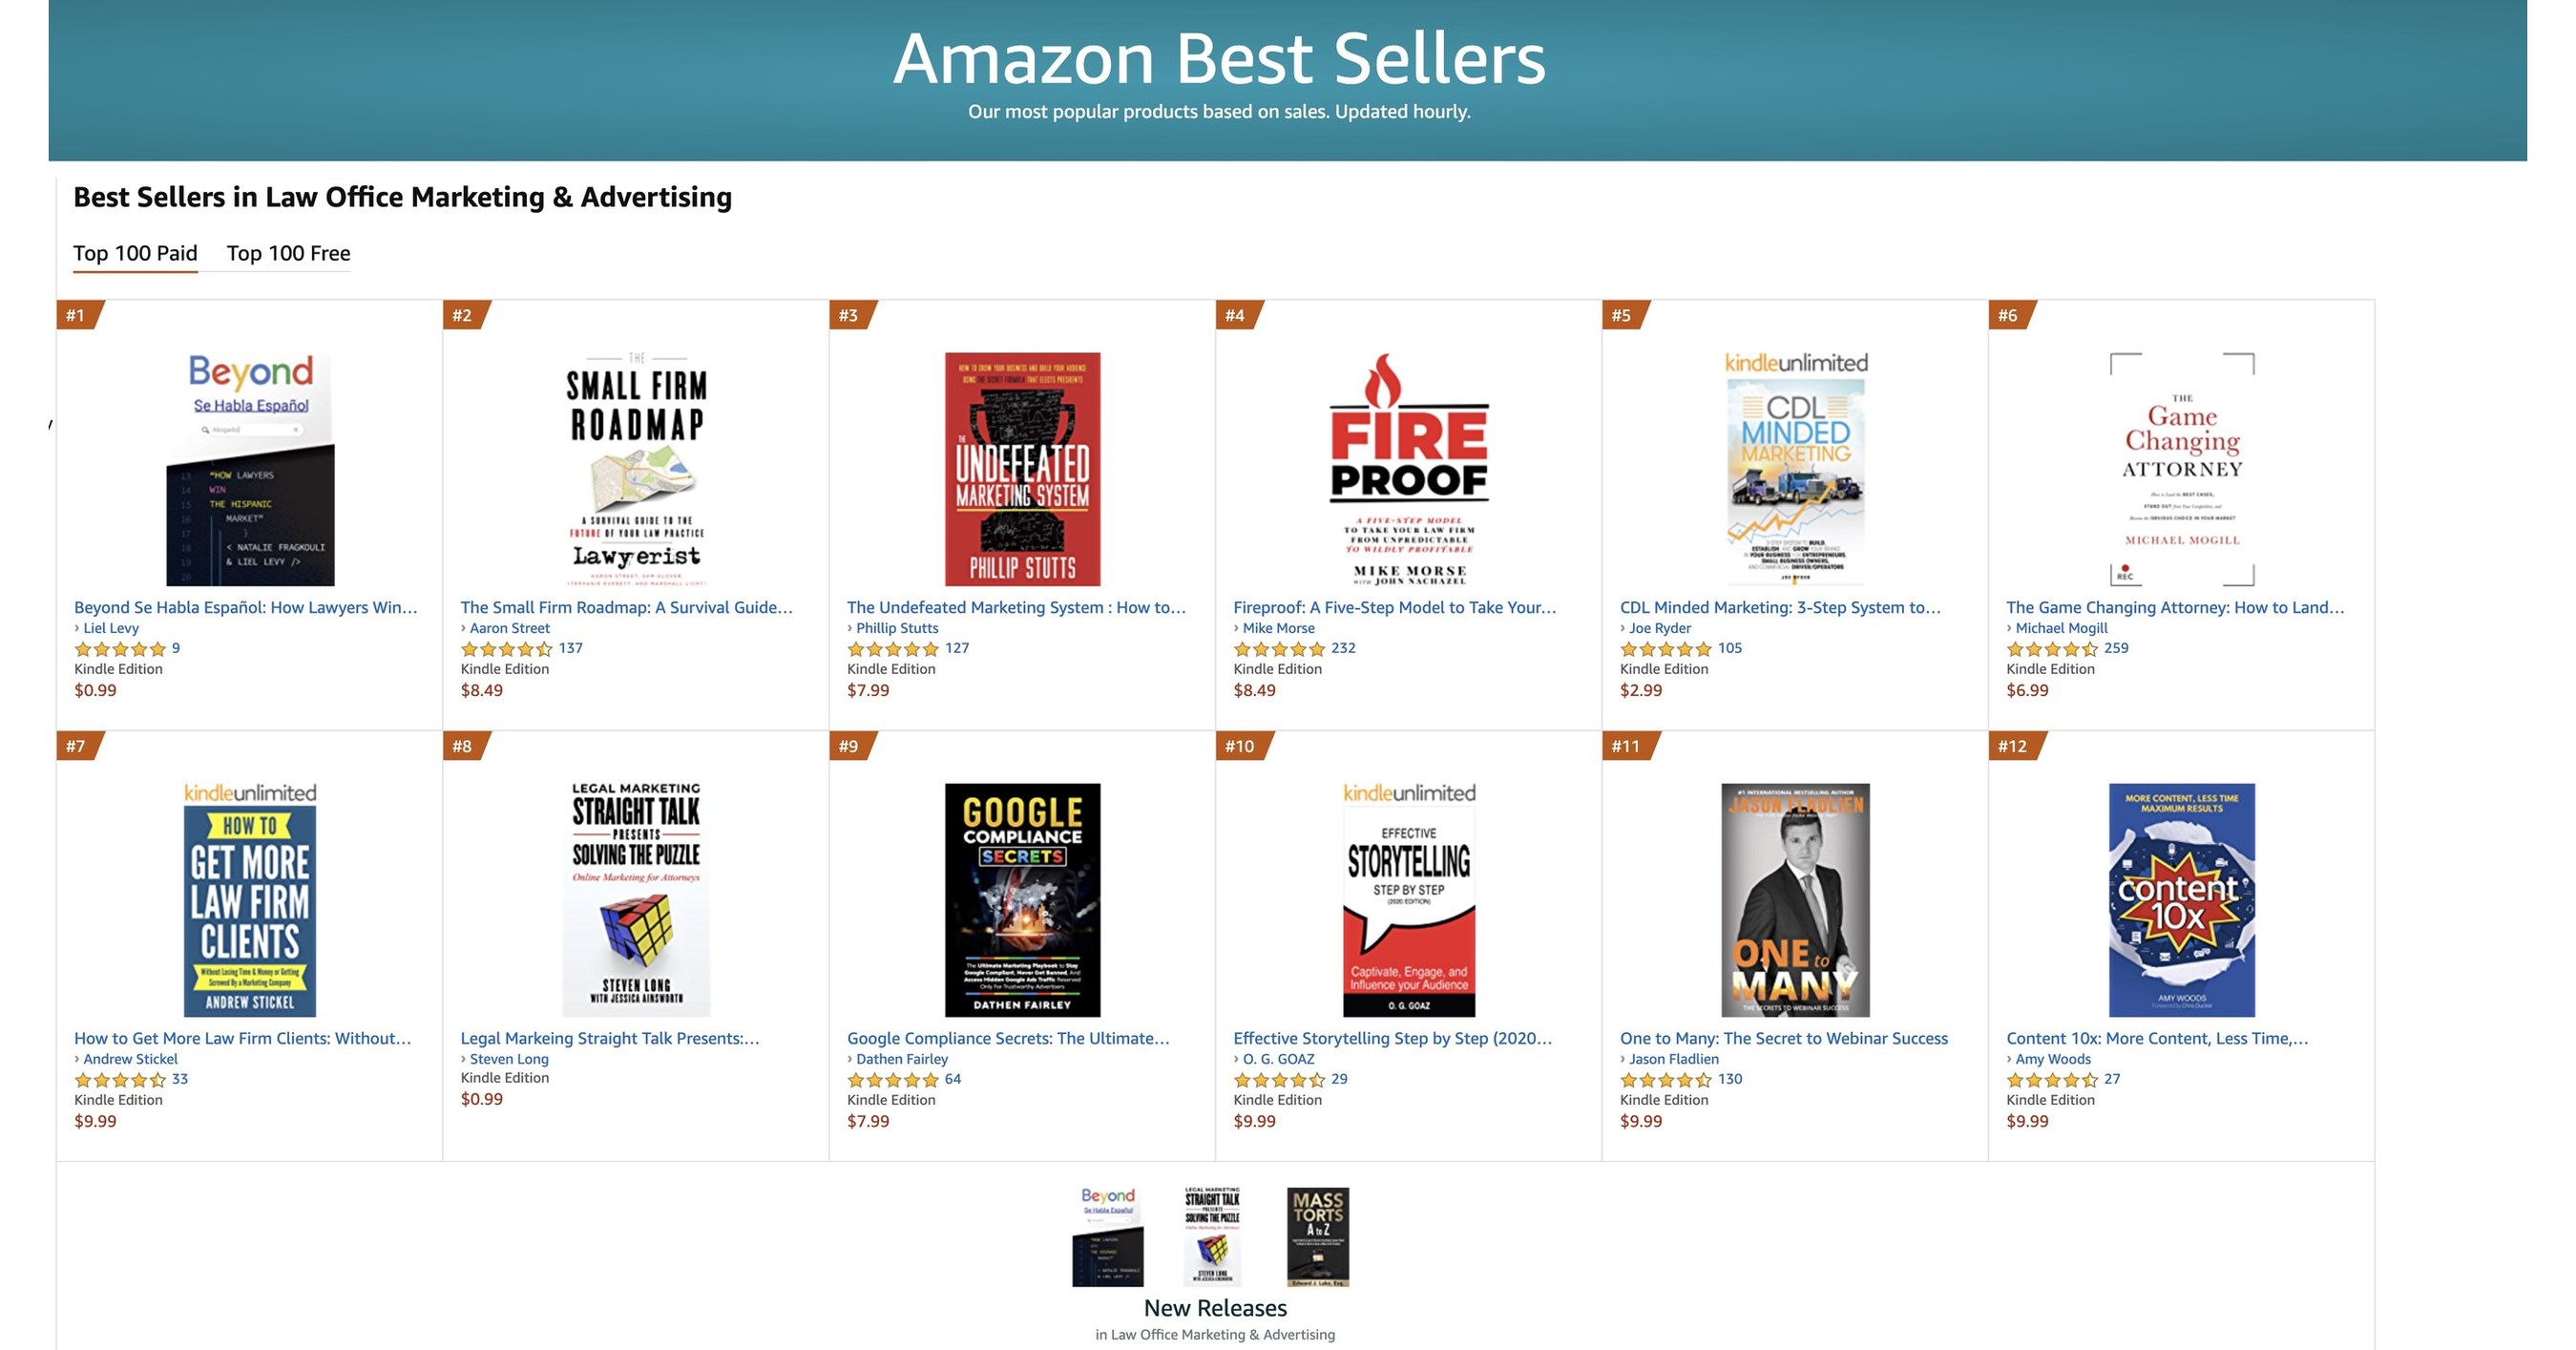 Latinx Legal Marketing Book Soars to Amazon's #1 New Release and Gains ...